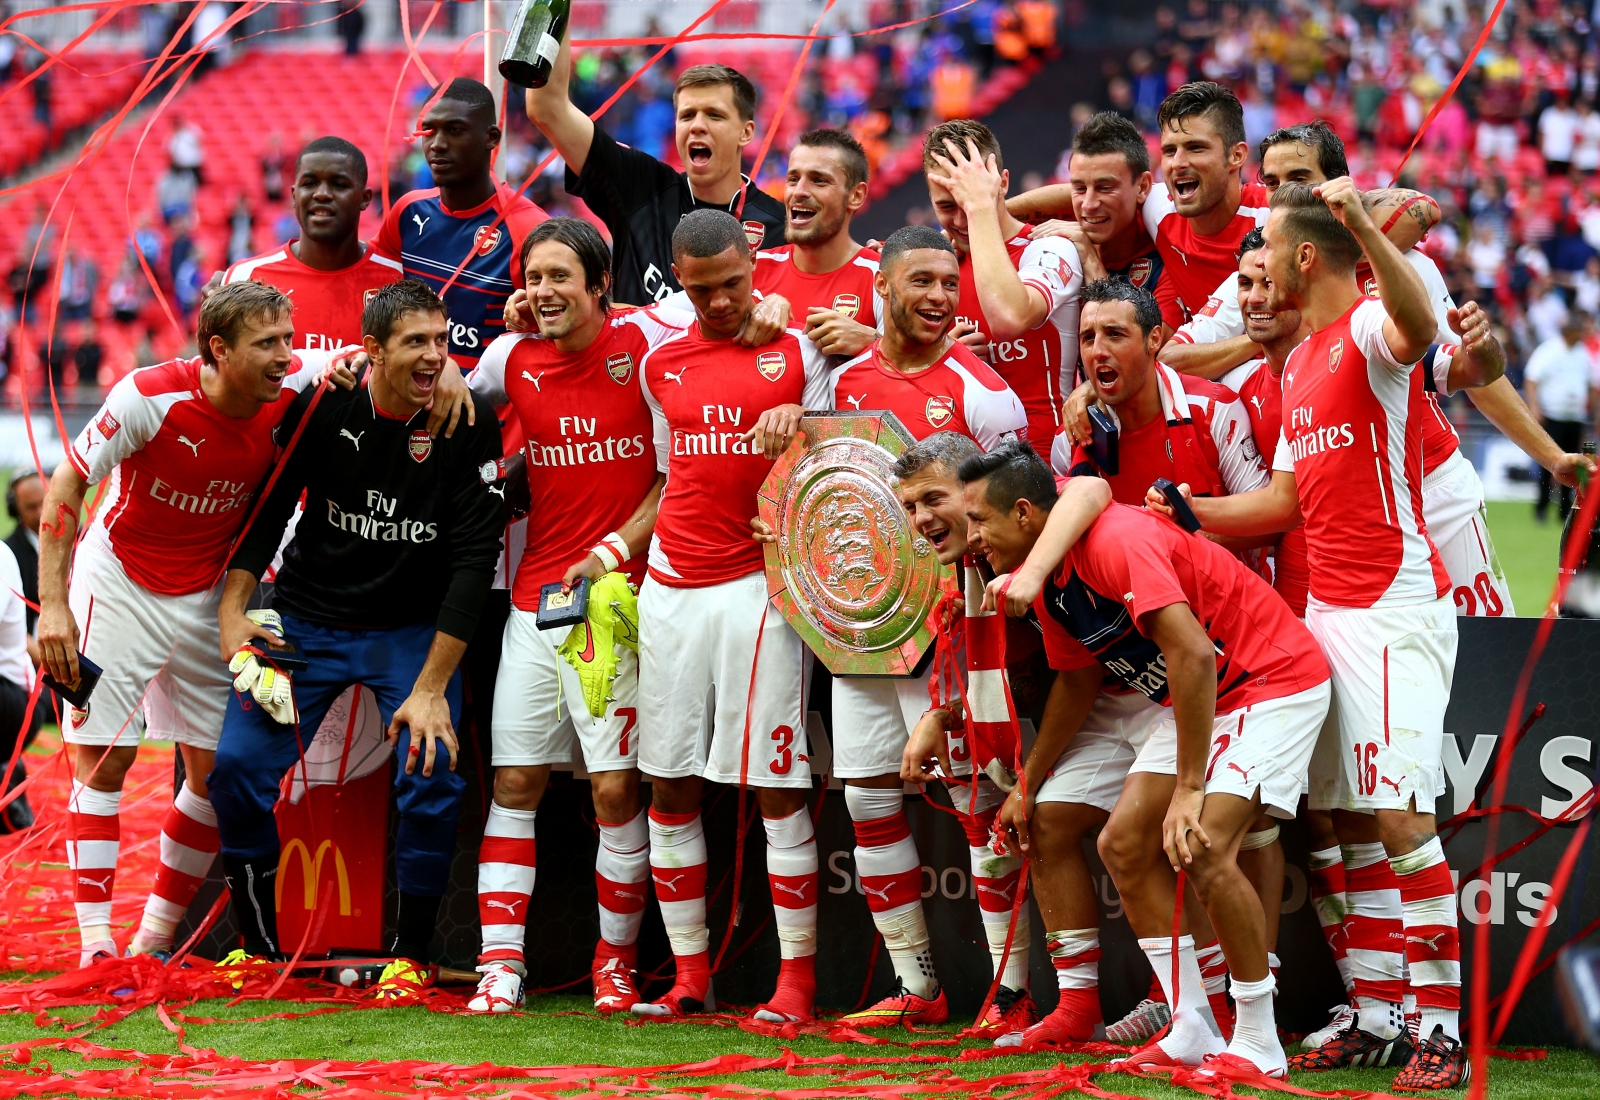 Arsenal Premier League 2014/15 Prediction: New Arrivals and Ramsey Can